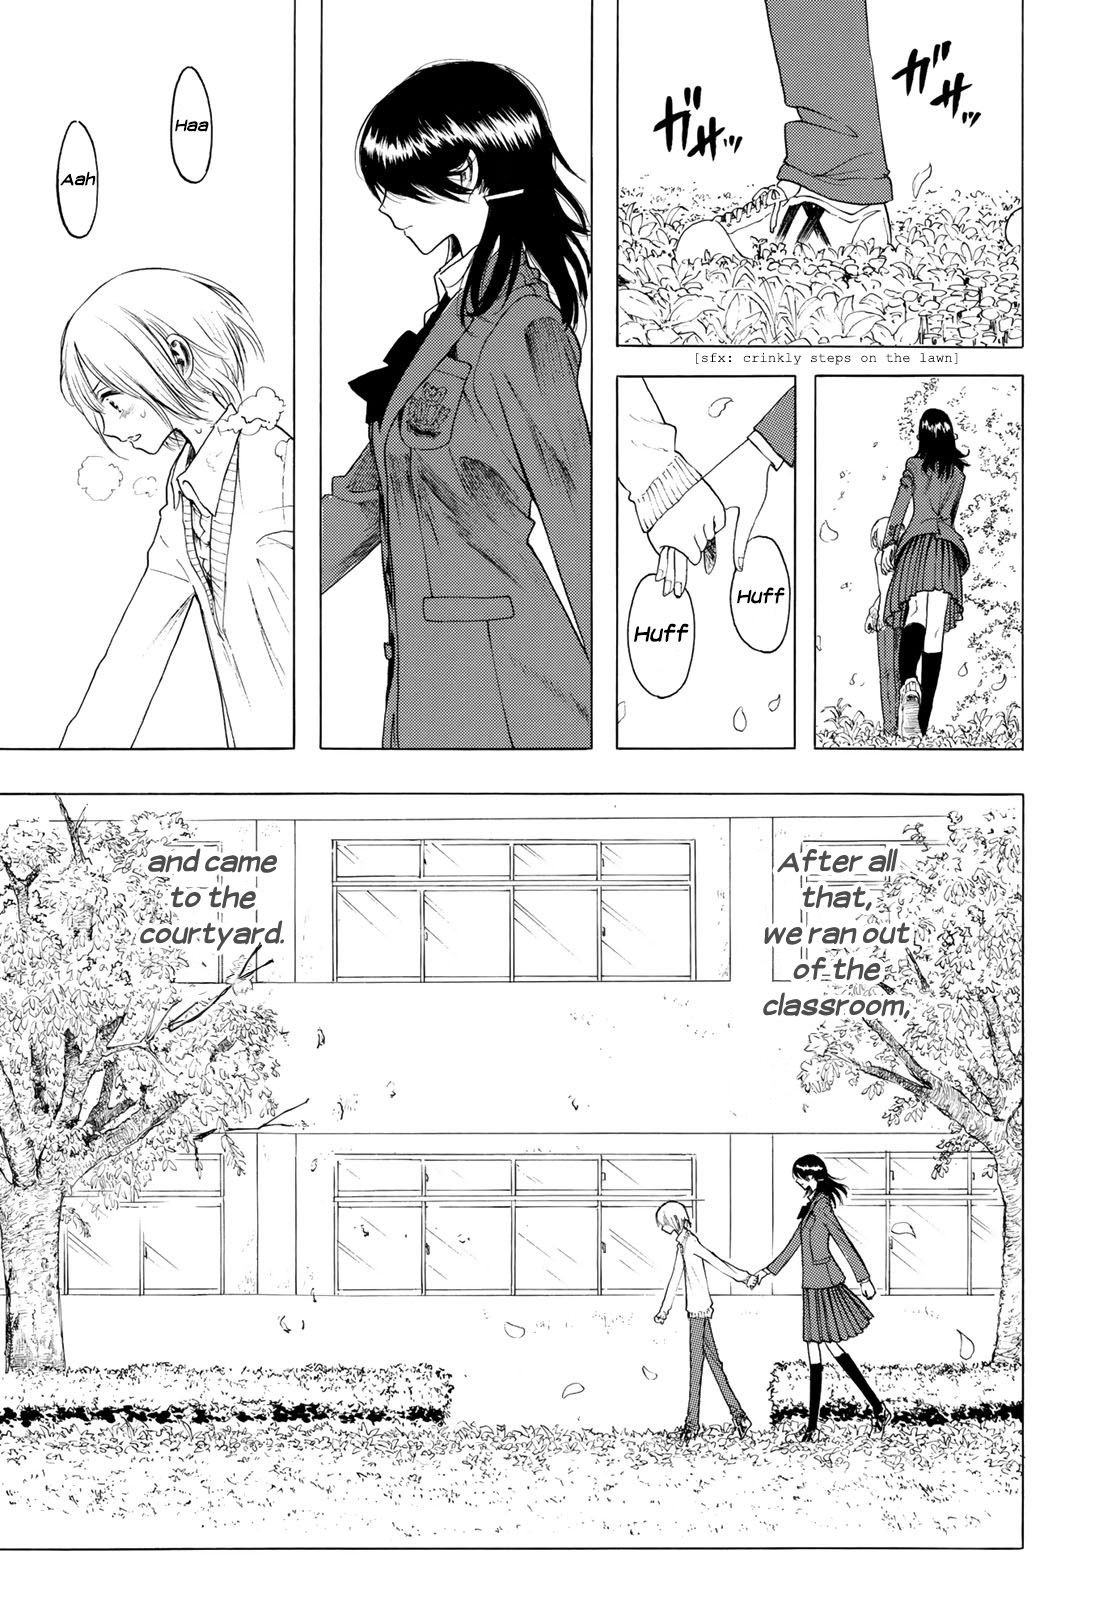 Looking Up to You Vol. 1 Ch. 6 Take Back